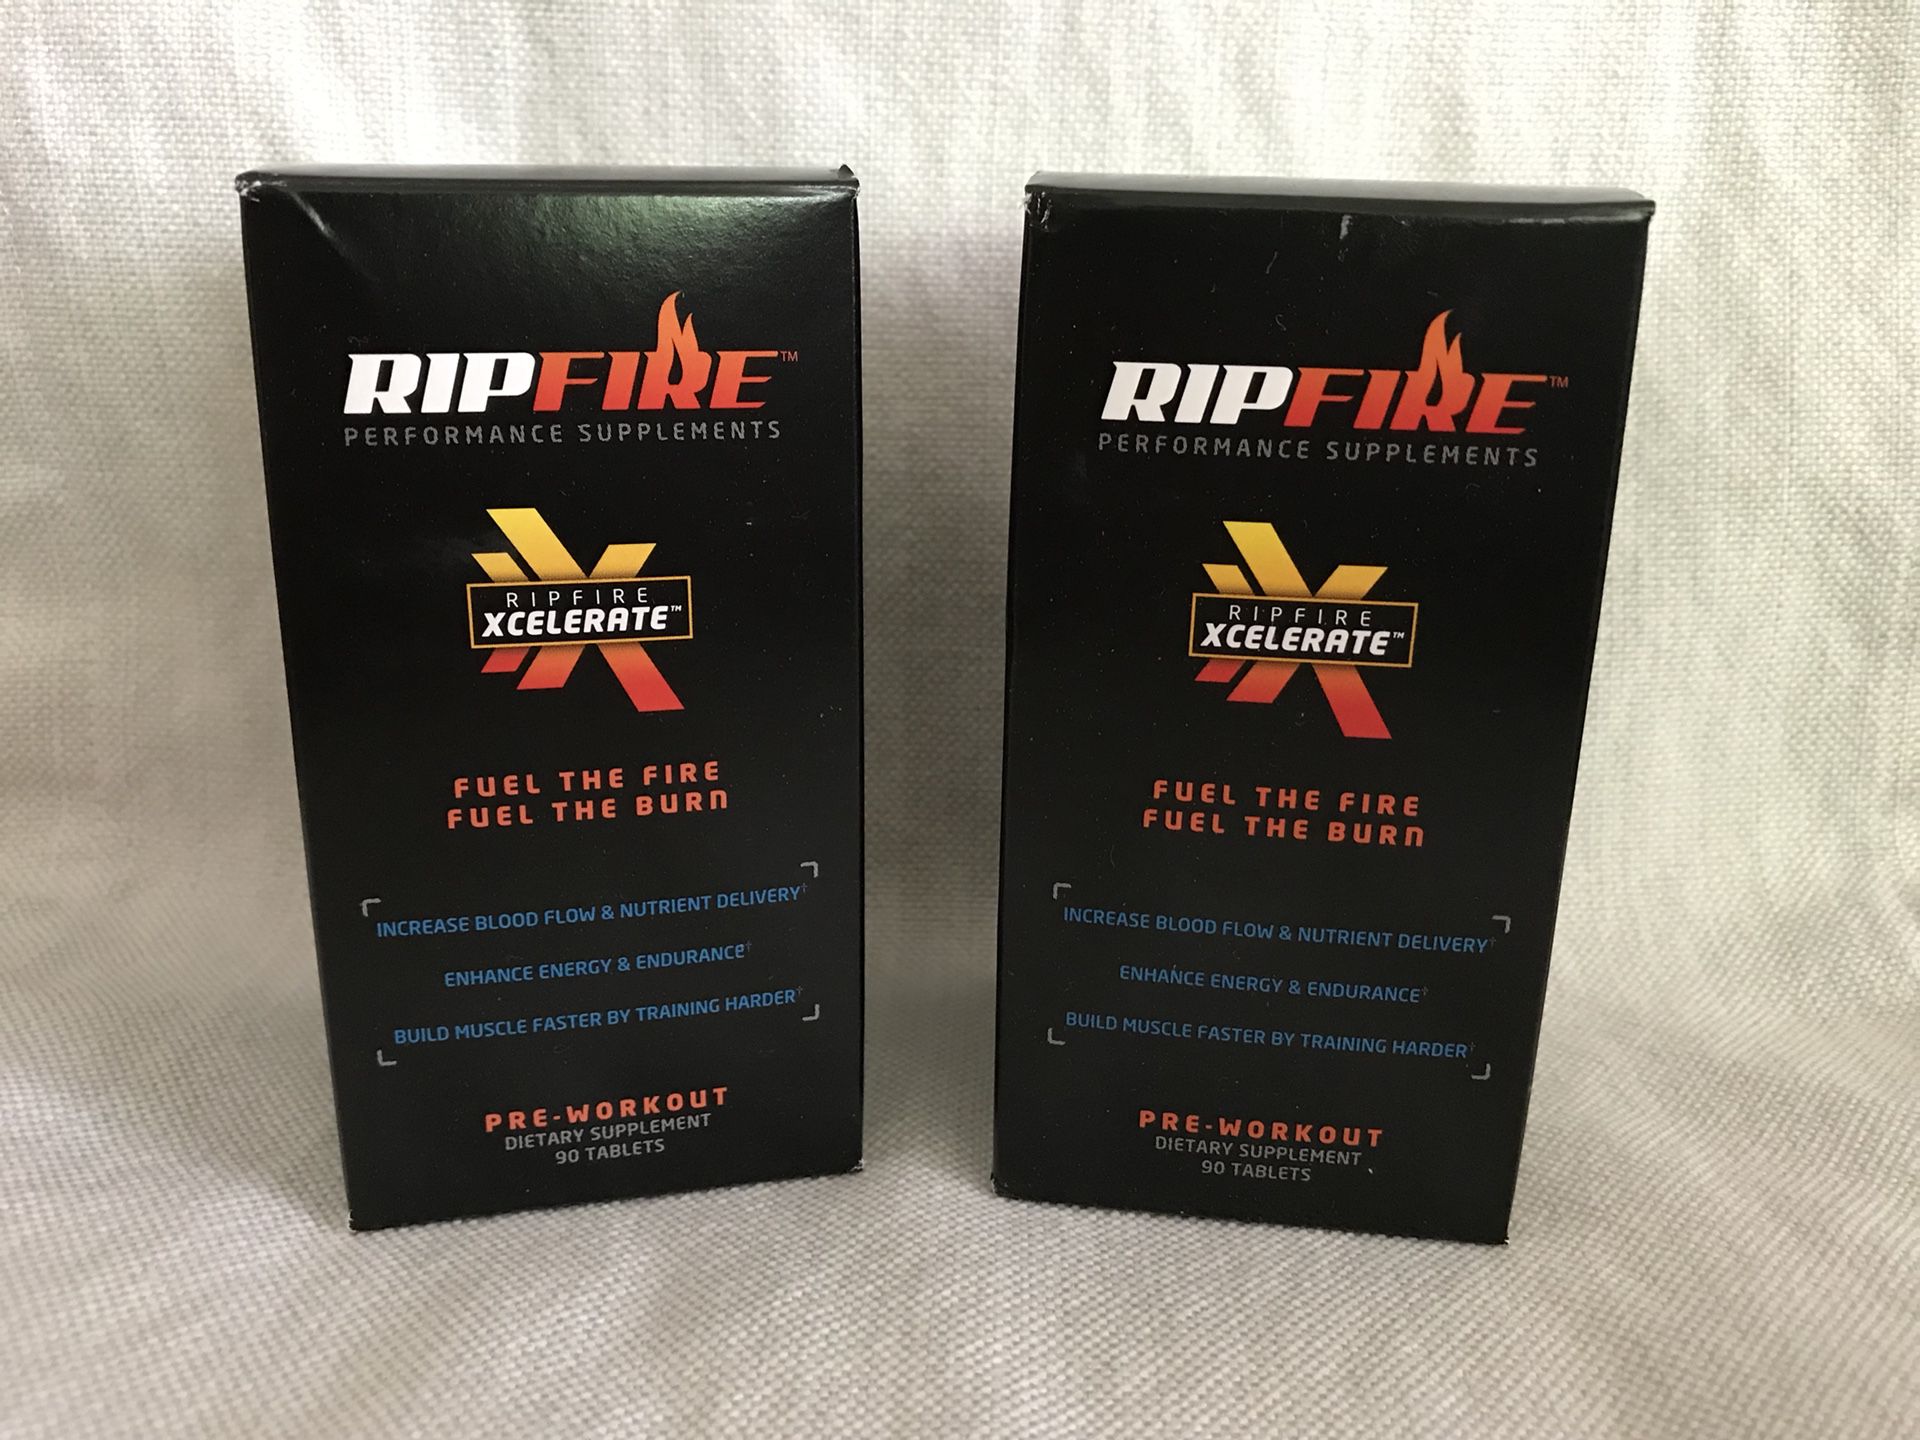 2 Bottles RipFire Xcelerate Performance Supplements, 90 Tablets each, for a total of 180 tablets.